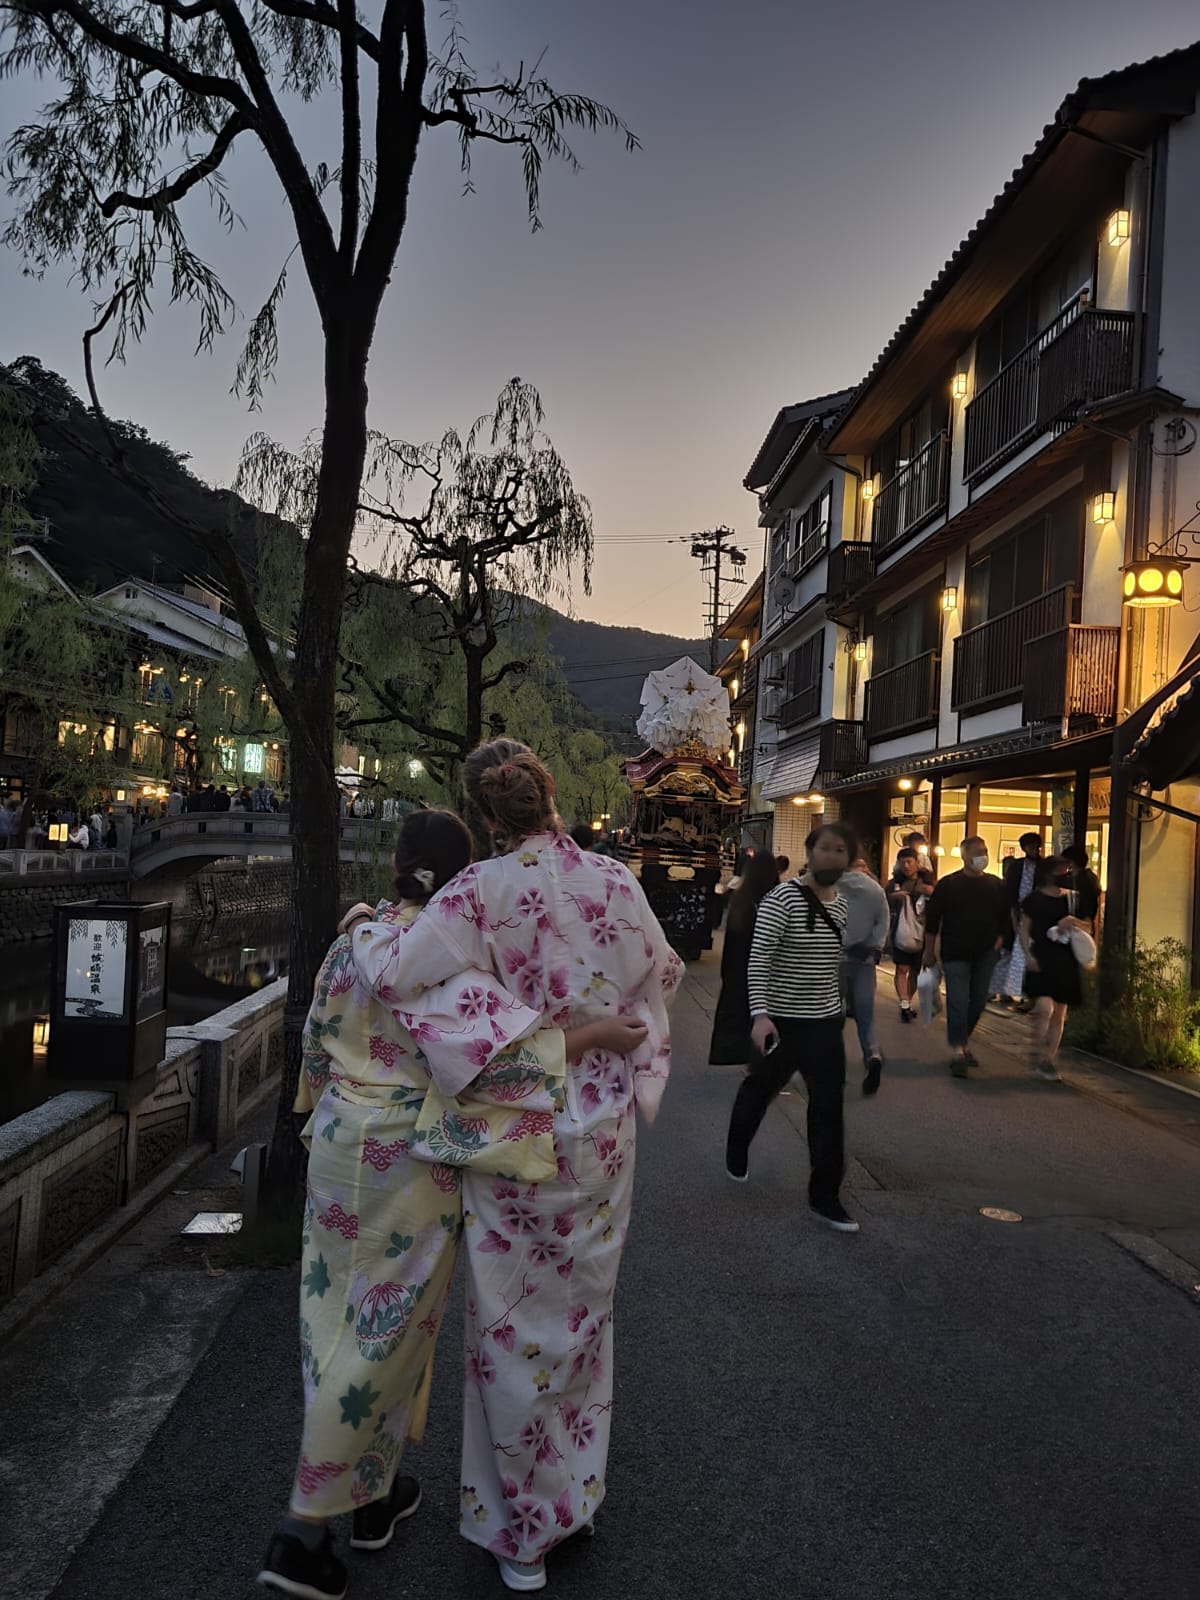 For This Reason, I Overcame My Fear – and Ate a Boiled Egg (Kinosaki Onsen, Part 2)